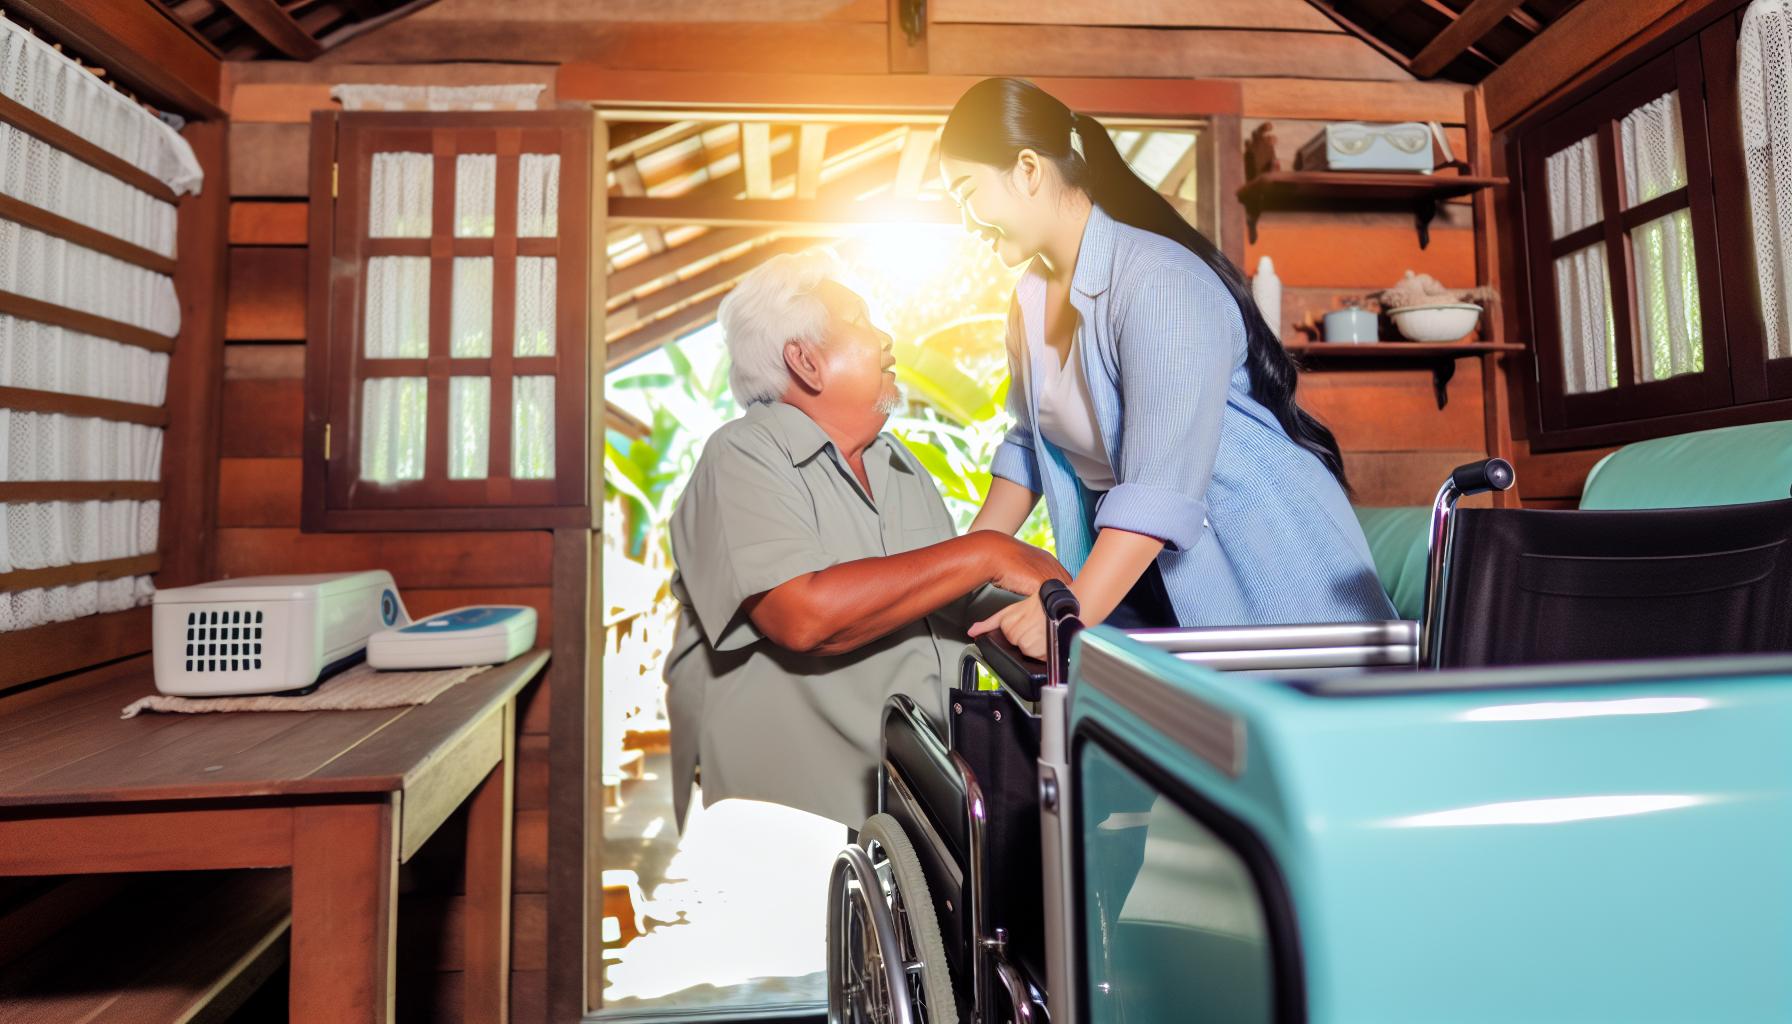 A caregiver providing attentive assistance to an elderly person at their home like cleaning, dressing, bathing as they safely enter a vehicle with a w